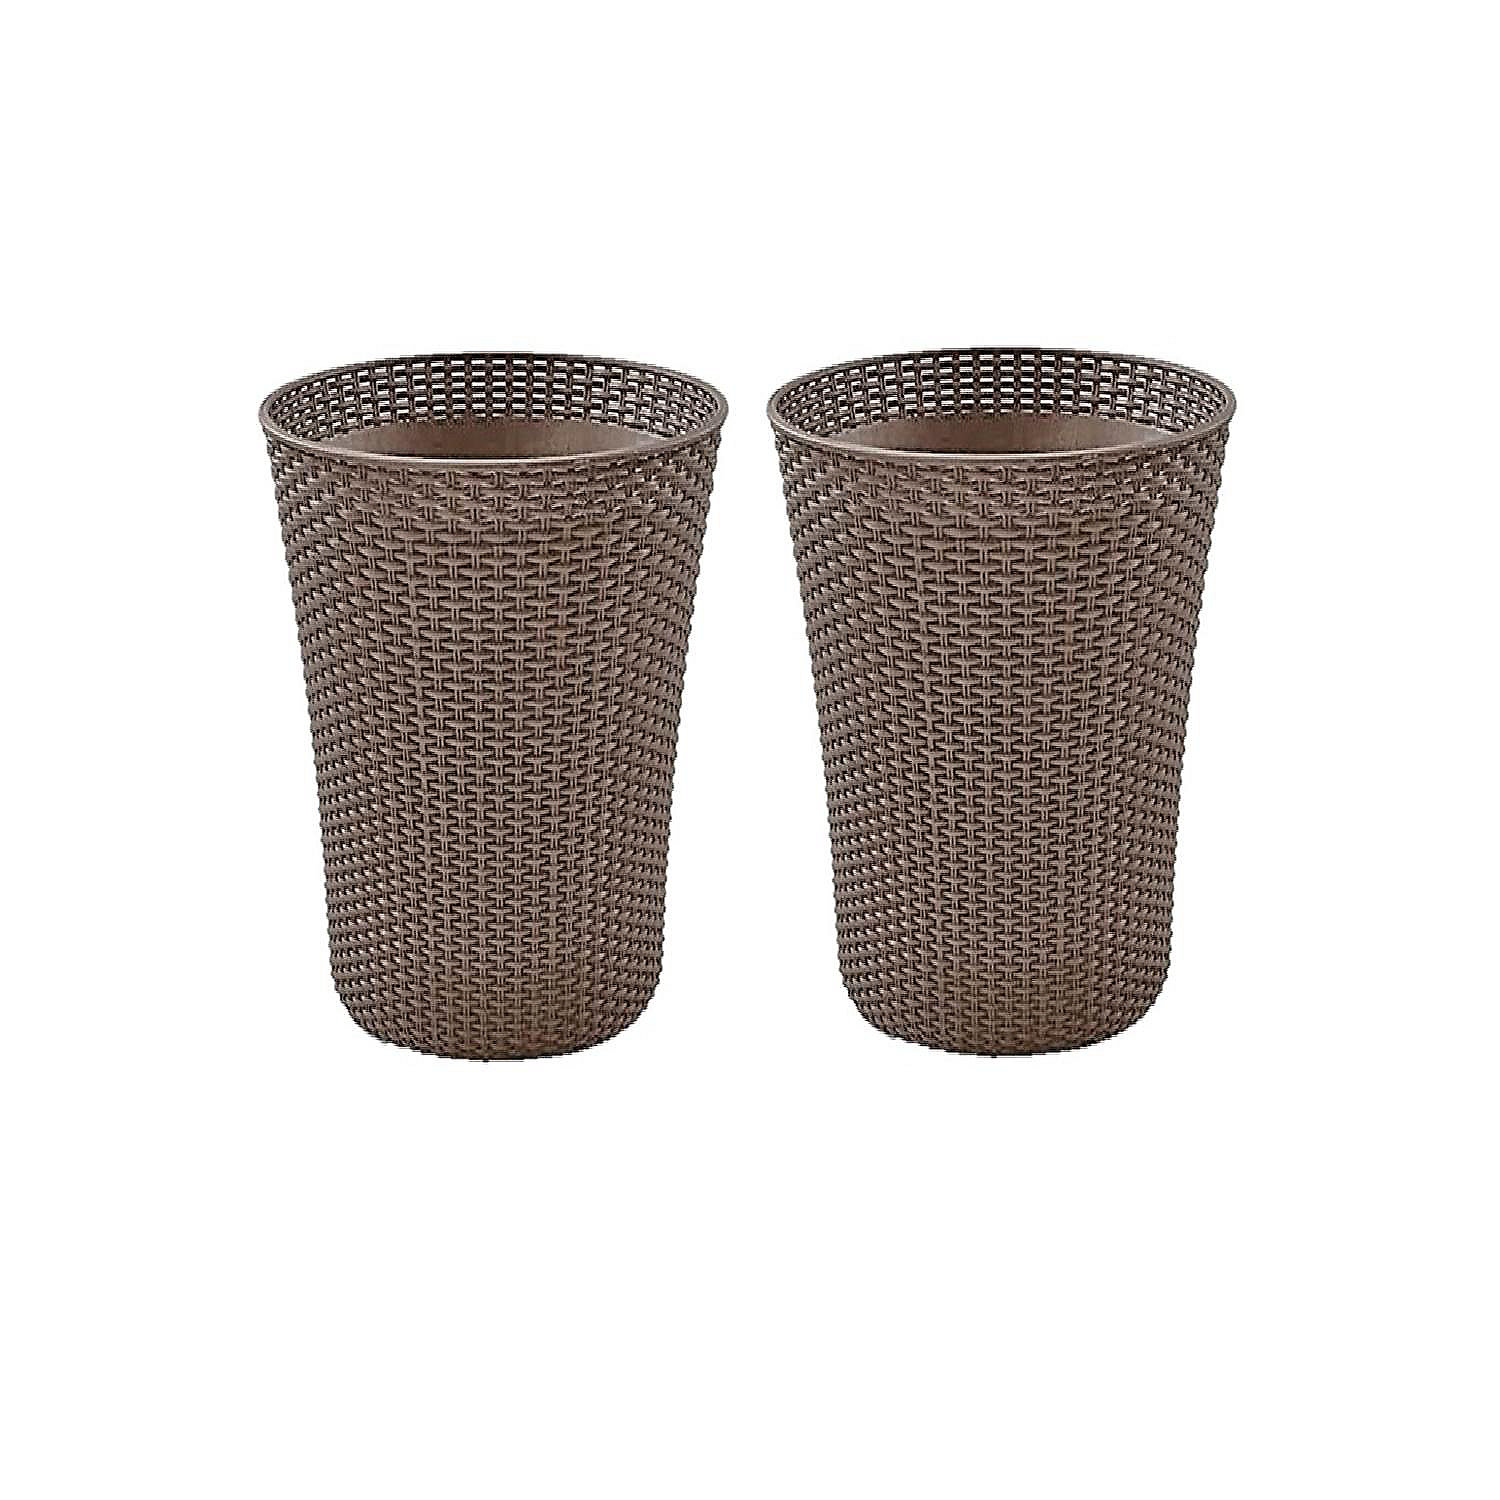 Medaille Uitgaan Begrip Keter Large Resin In-outdoor Home and Garden Whiskey Brown Planters- Set of  2